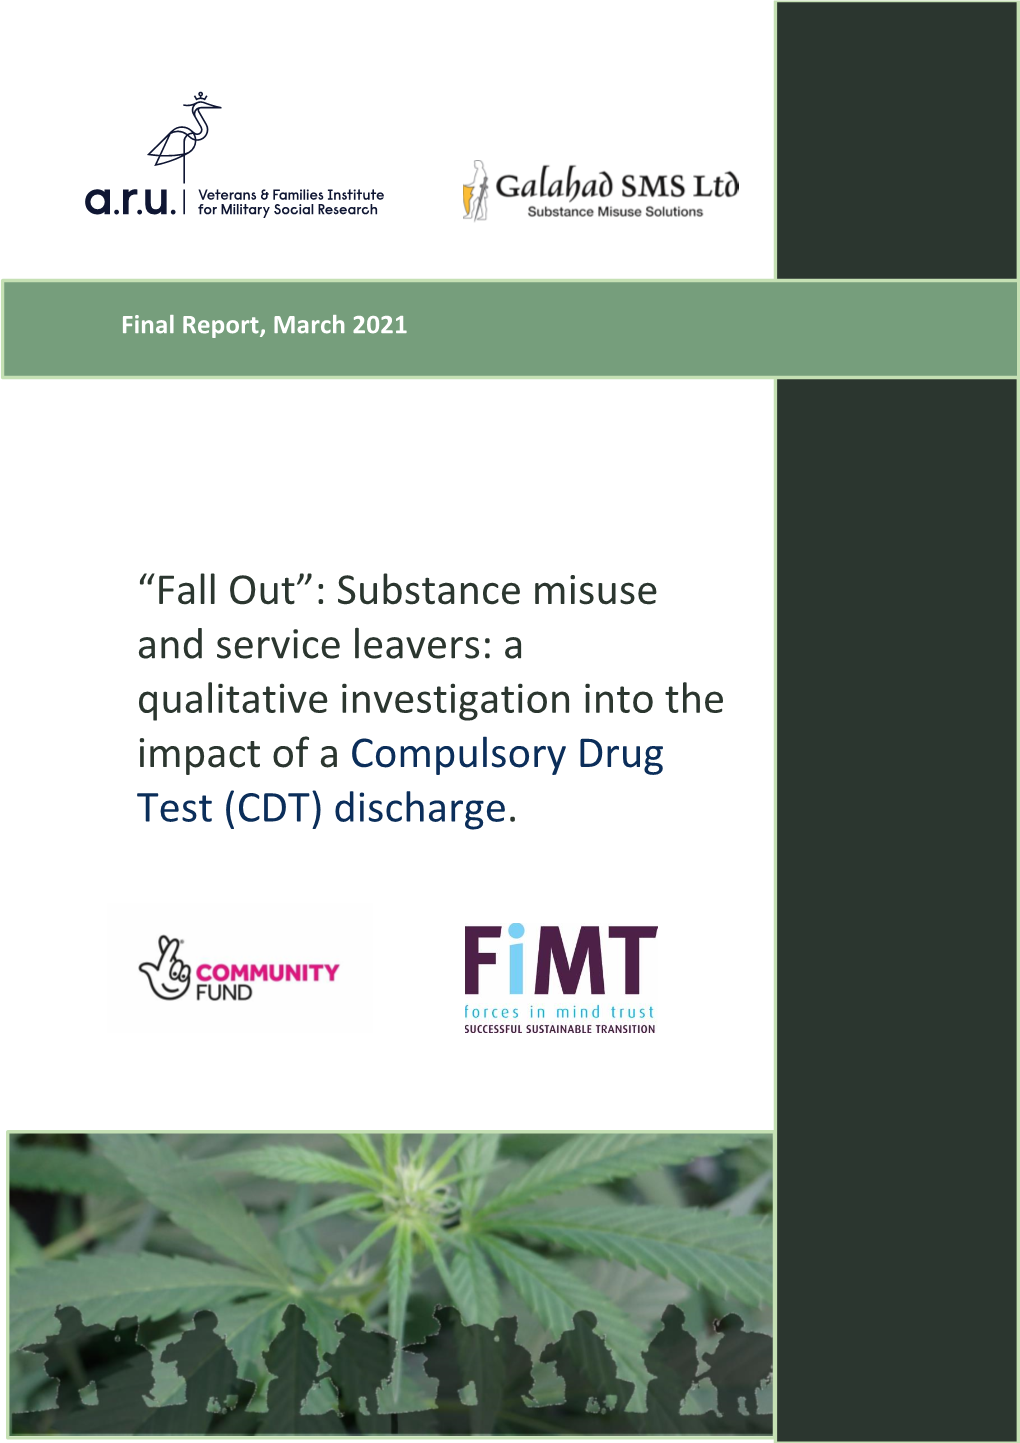 “Fall Out”: Substance Misuse and Service Leavers: a Qualitative Investigation Into the Impact of a Compulsory Drug Test (CDT) Discharge